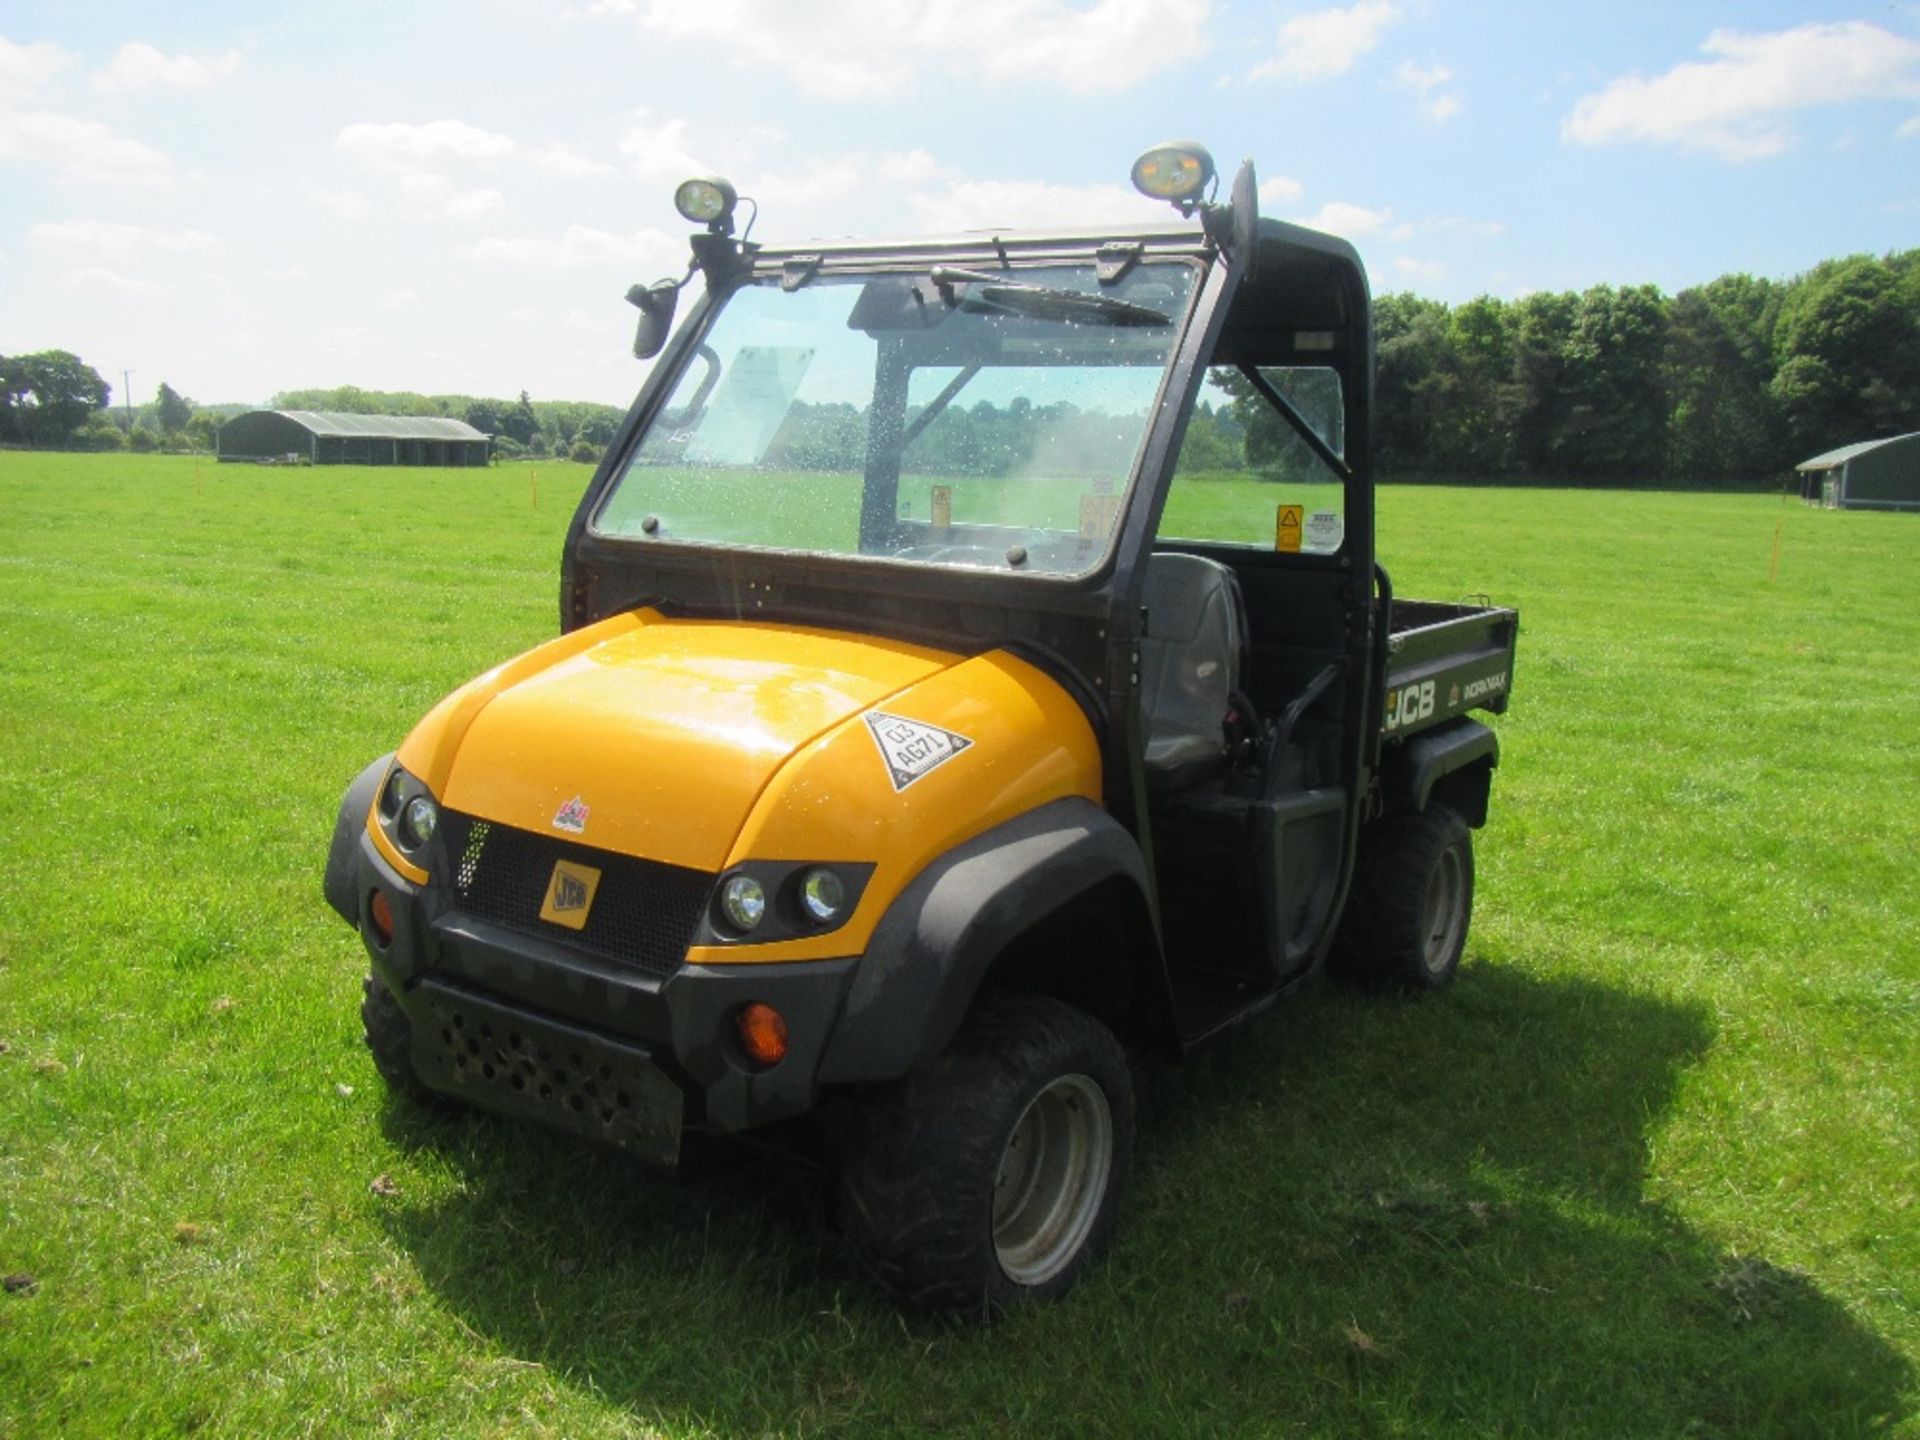 2012 JCB Workmax 1000D diesel 4x4 UTV Fitted with half cab Reg. No: FX62 FLN Serial No. - Image 2 of 5